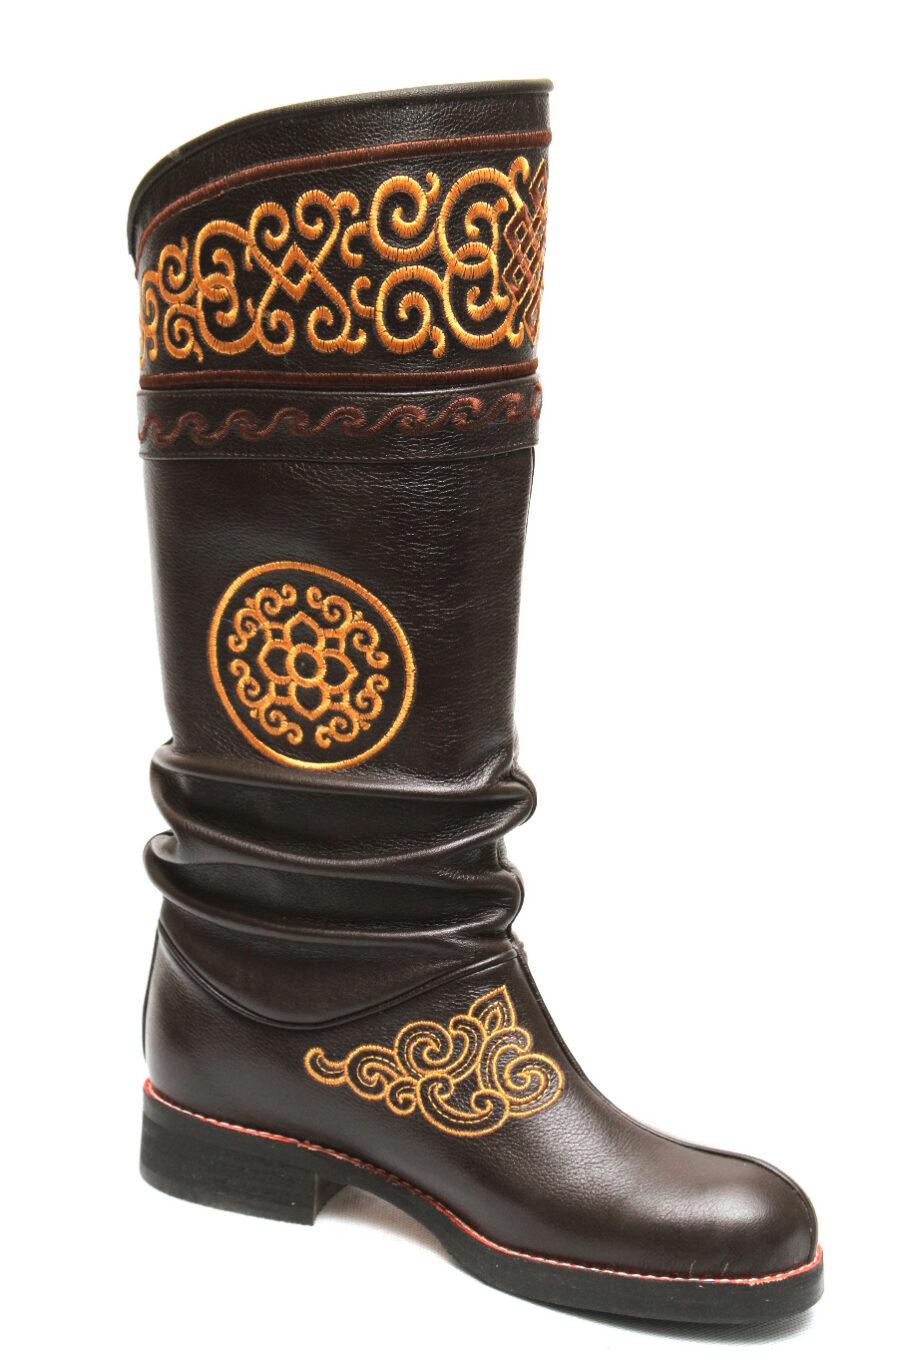 Mongolian Dark Brown Boots With Yellow Stitching 2 2